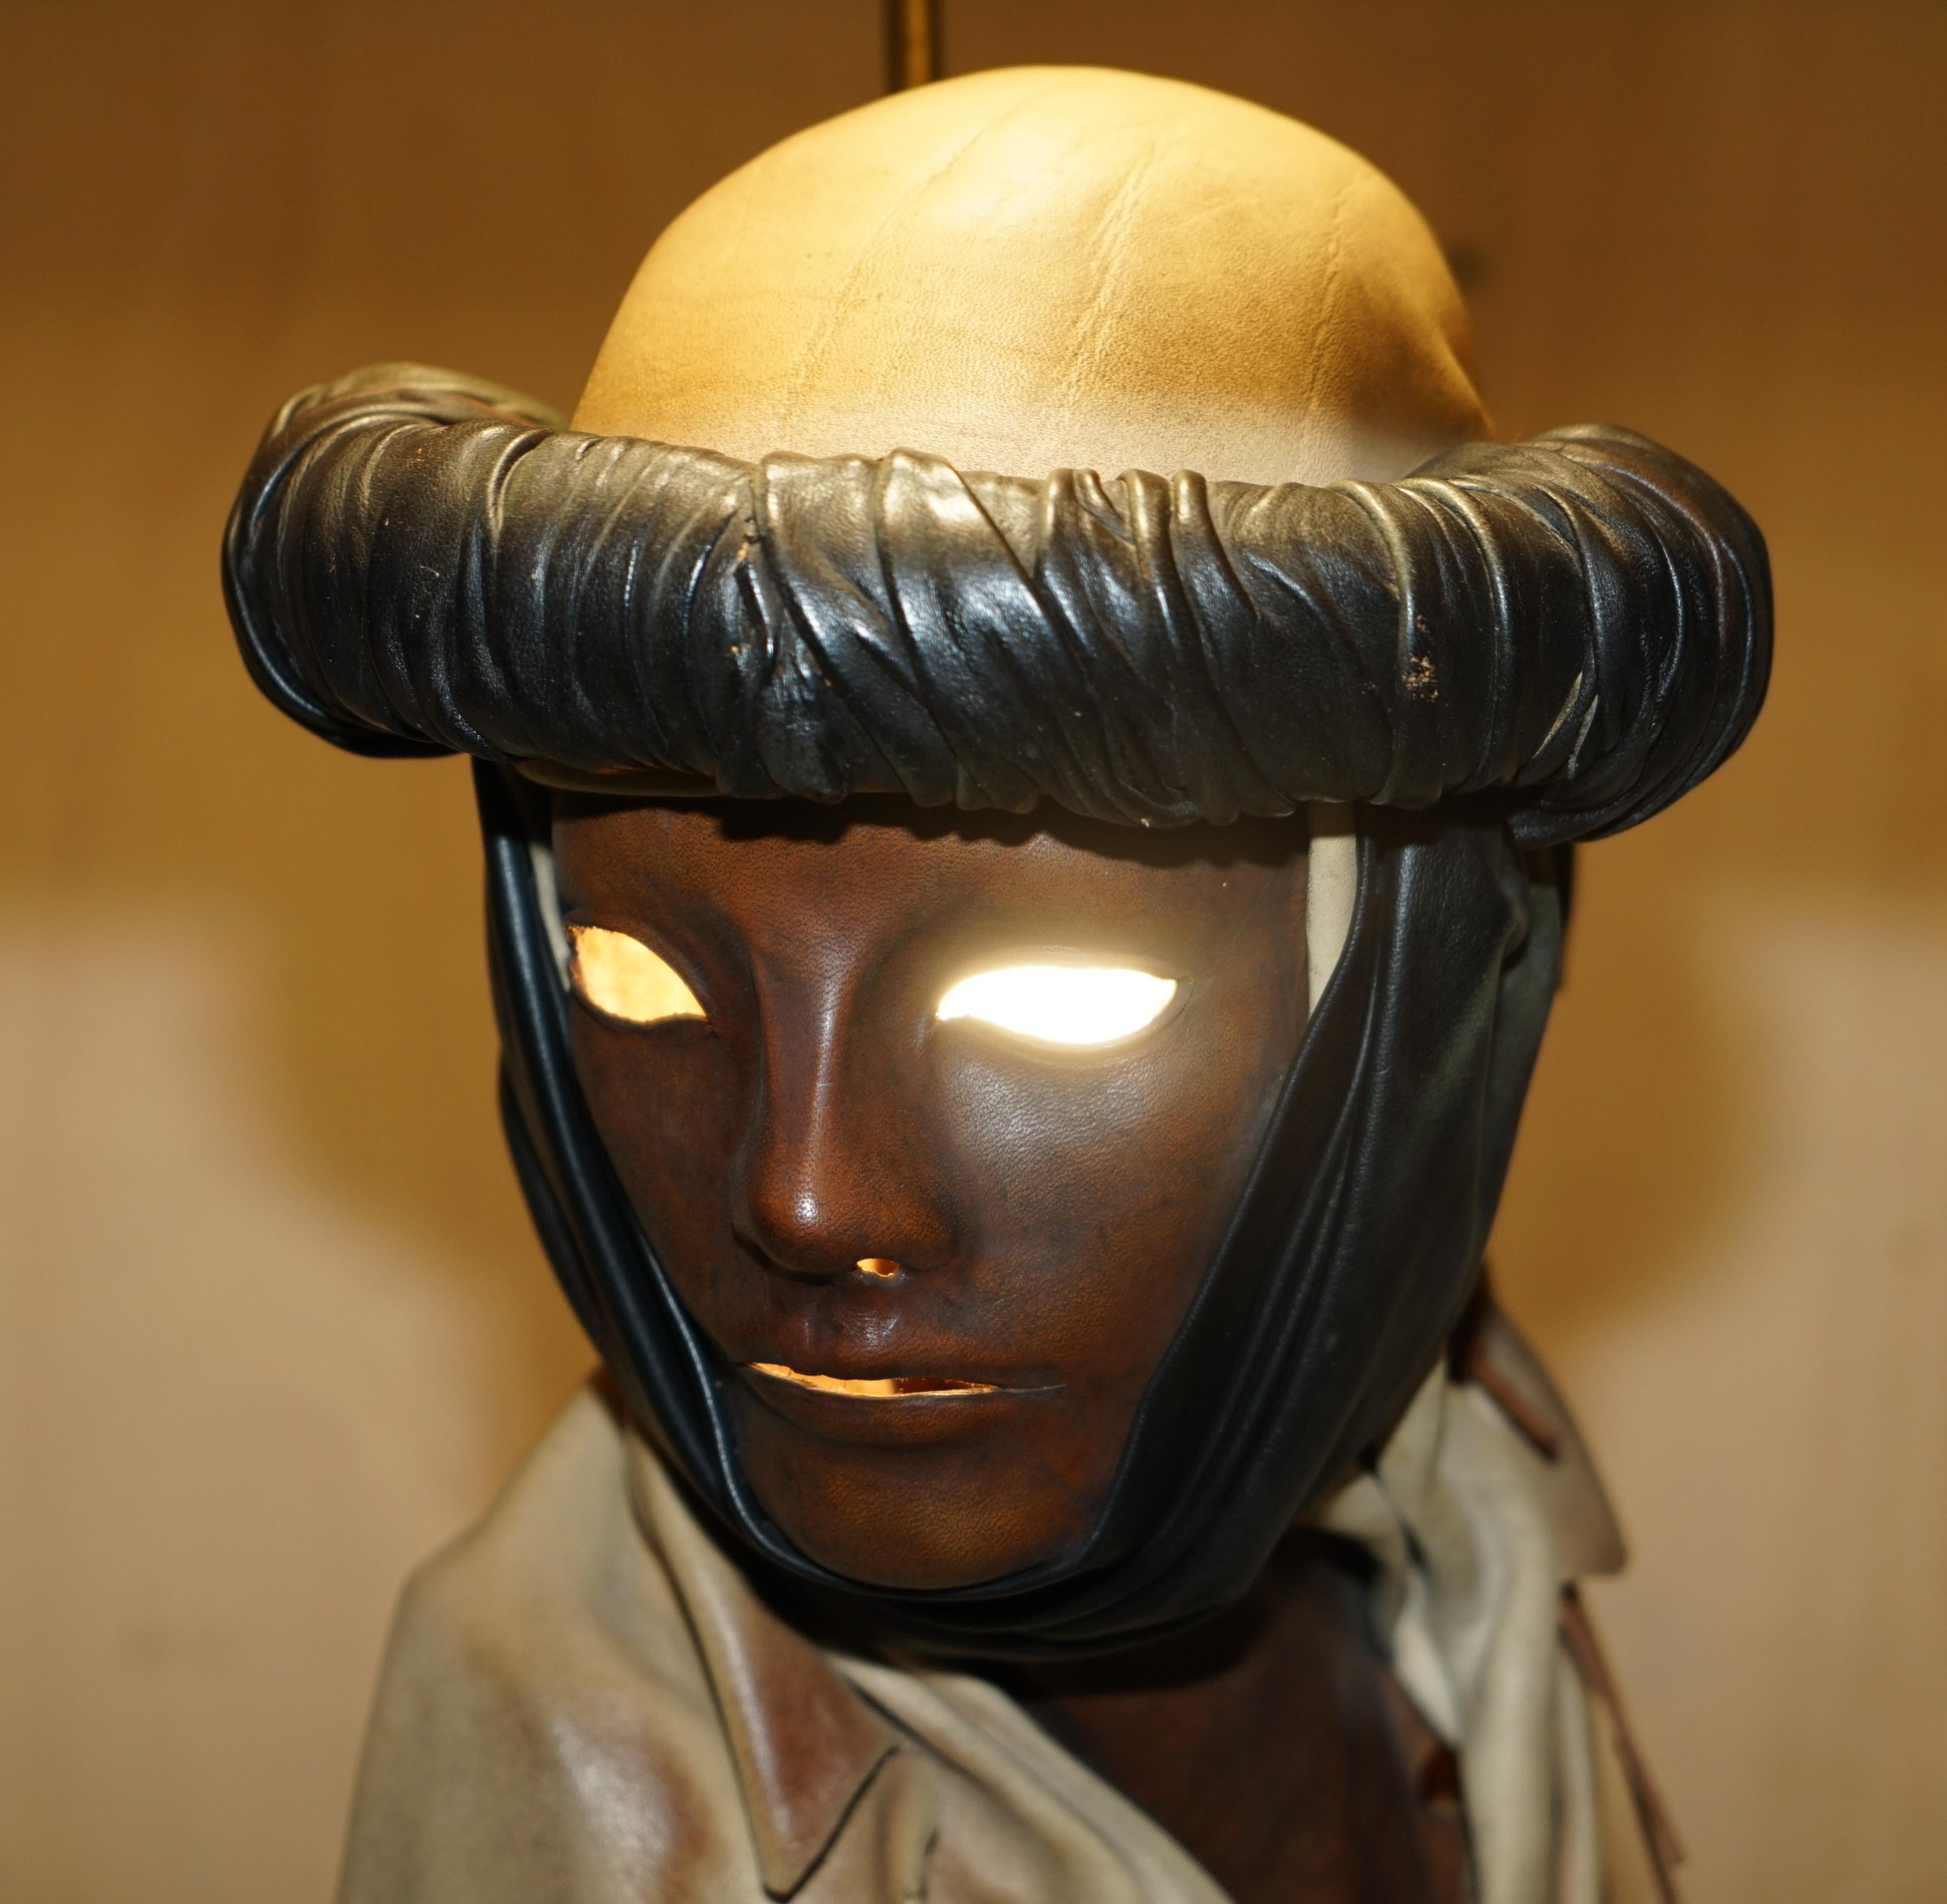 European Midcentury Arabian Face Lamp Signed Pourbaix circa 1960s Must See Pictures For Sale